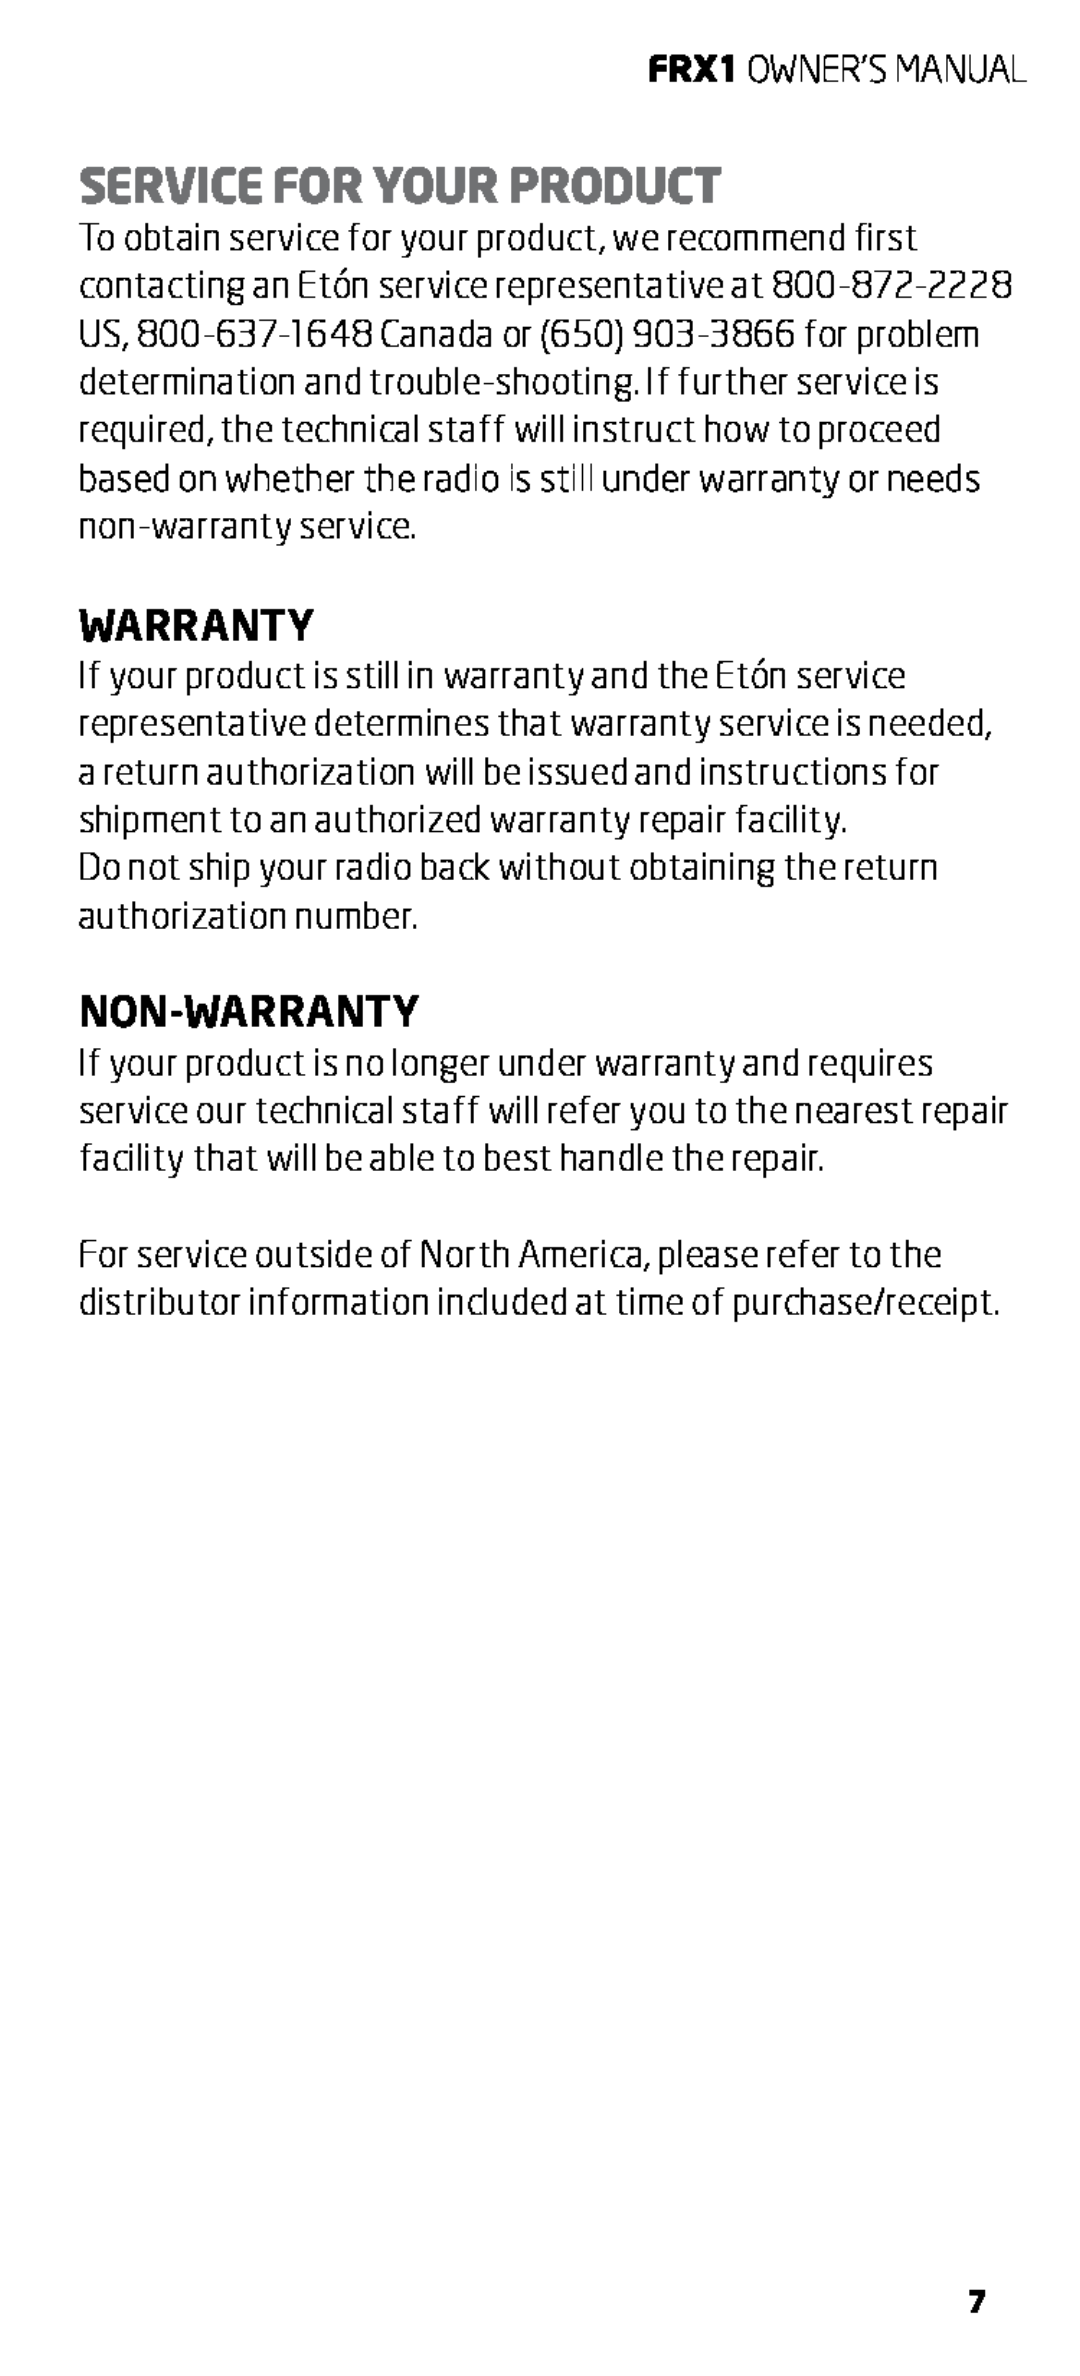 Eton FRX1 owner manual Service For Your Product, Non-Warranty 